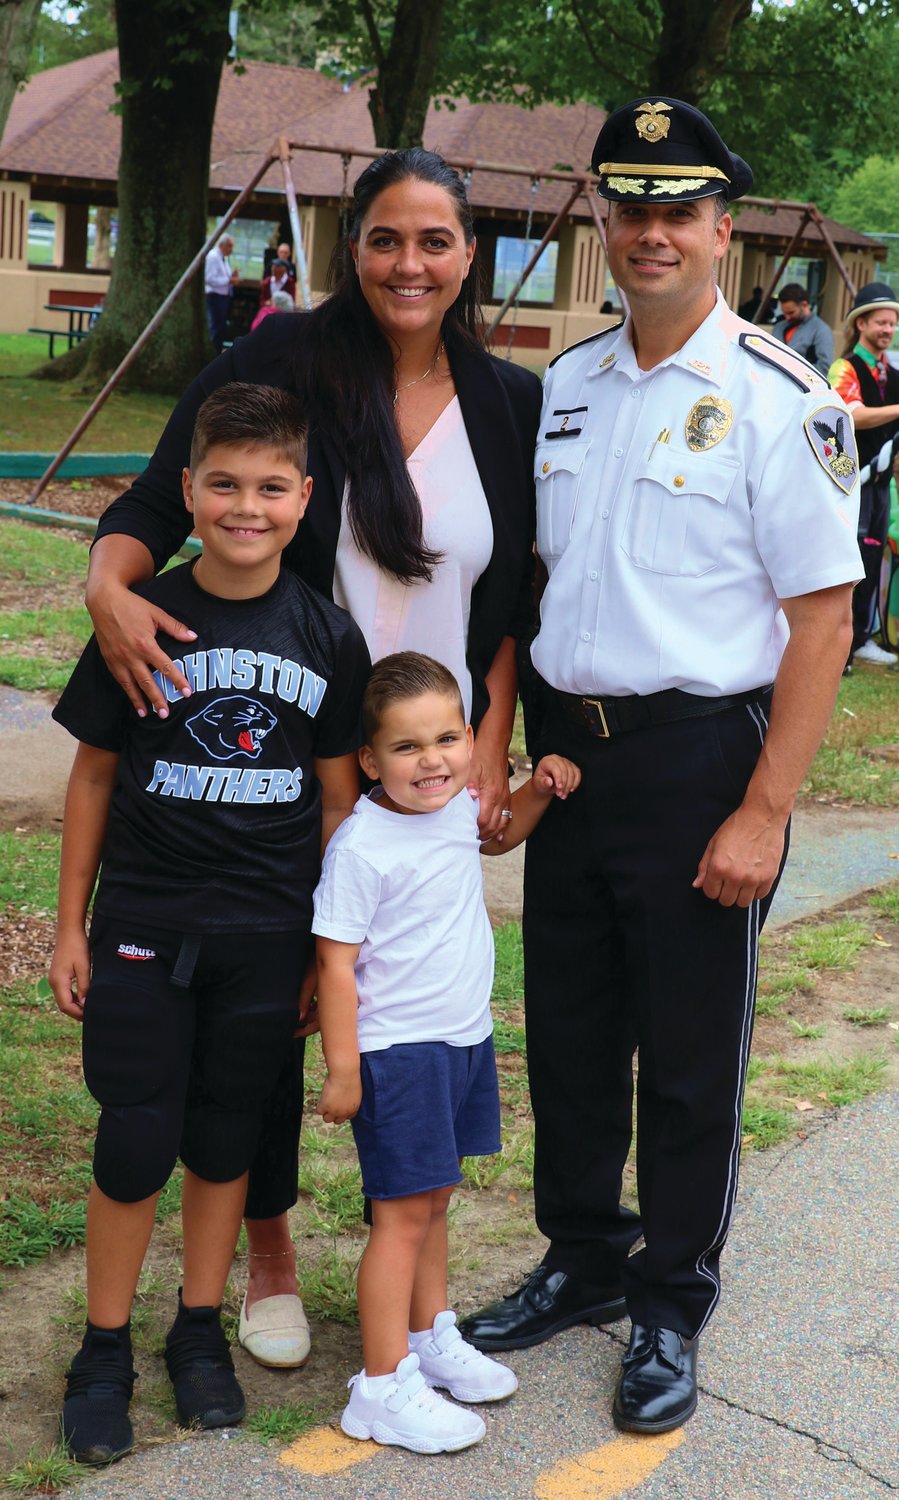 FAMLY FUN: JPD Deputy Chief Mark Vieira and his wife Erica and sons Marco and Anthony were among the many families that enjoyed the food and friendships at the recent NNO in Johnston.